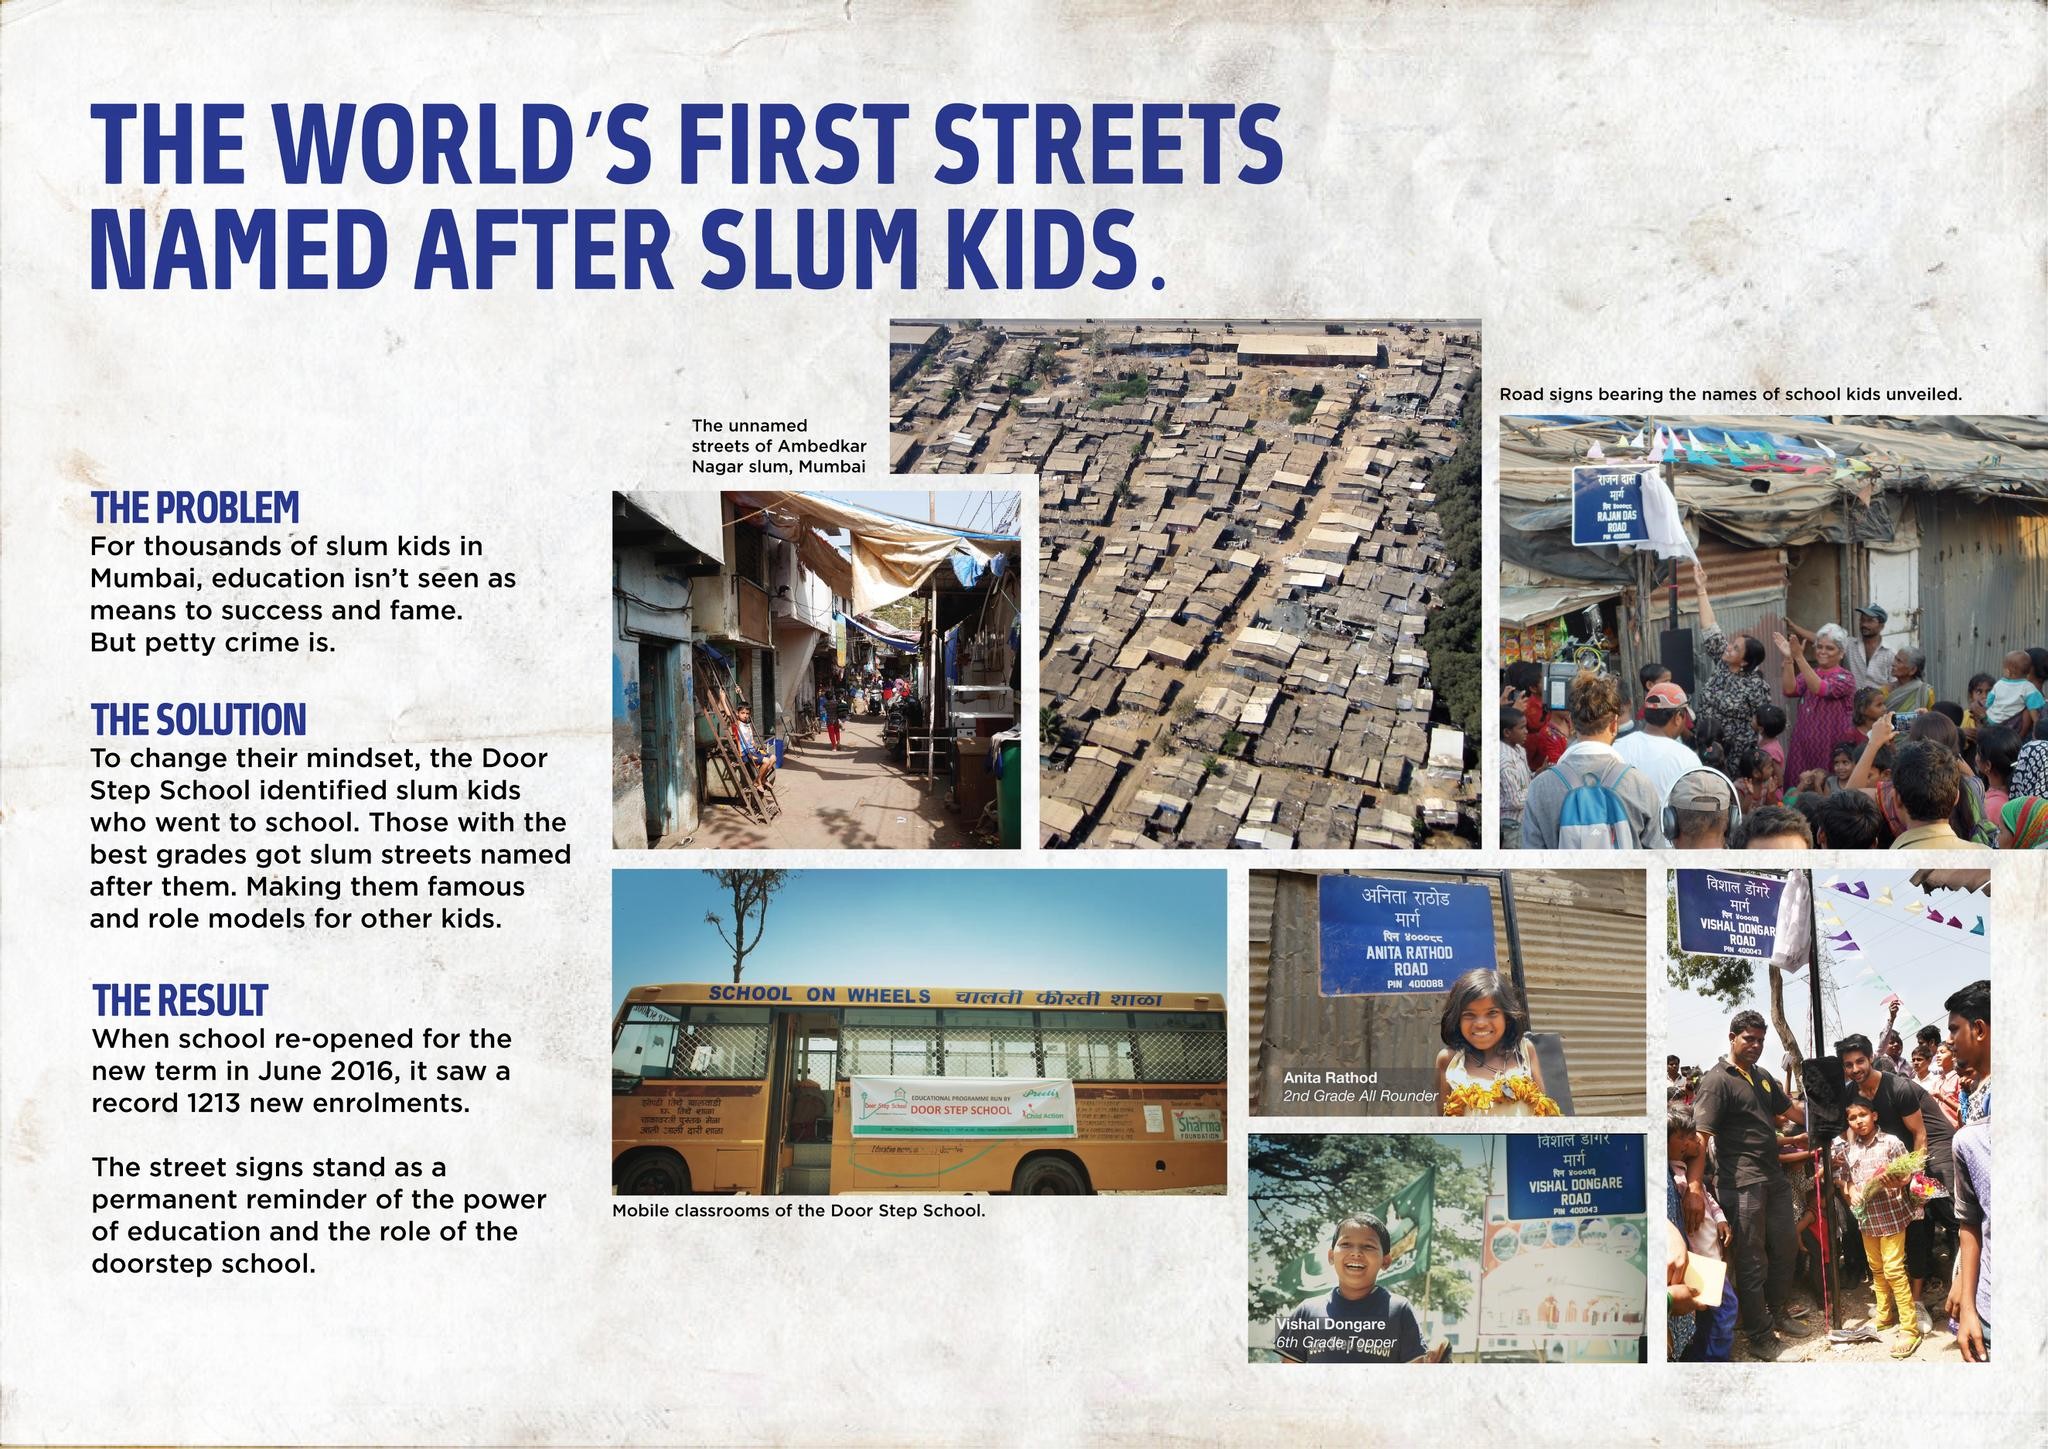 The world's 1st streets named after slum kids